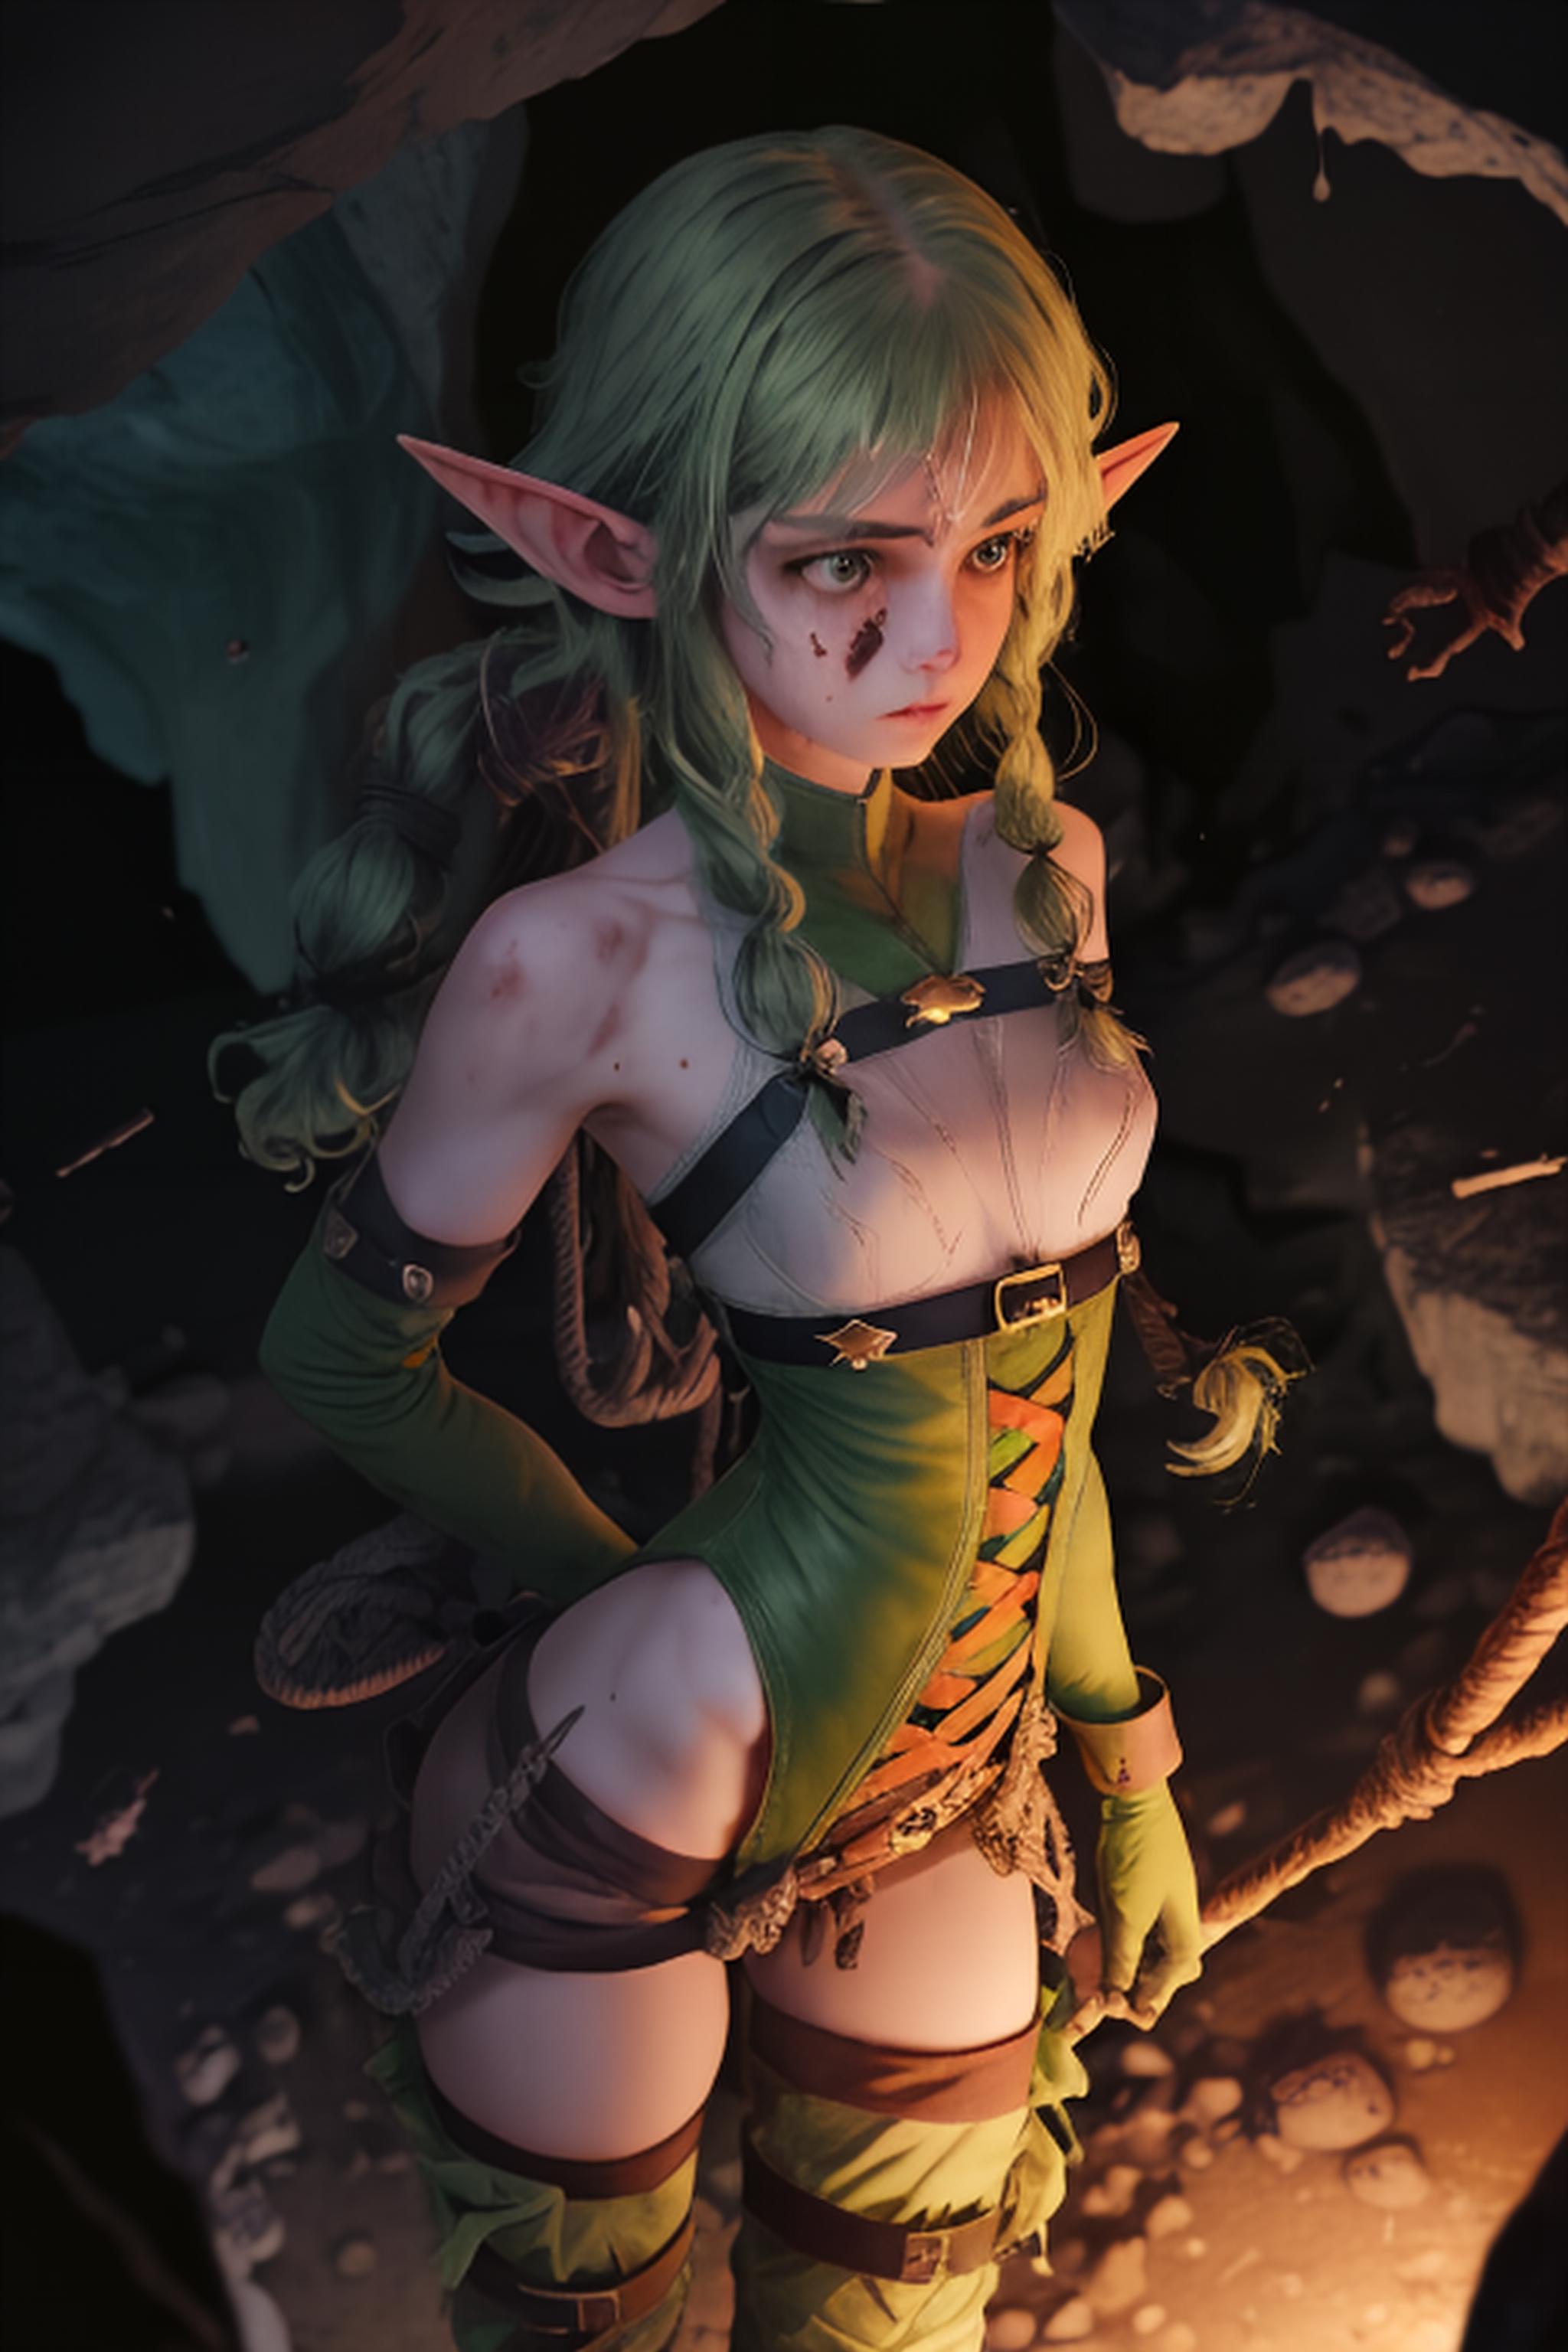 A computer-generated image of a green-haired elf woman with a green dress, wearing a belt and standing in a dark environment. The scene includes a rope and a few rocks nearby.